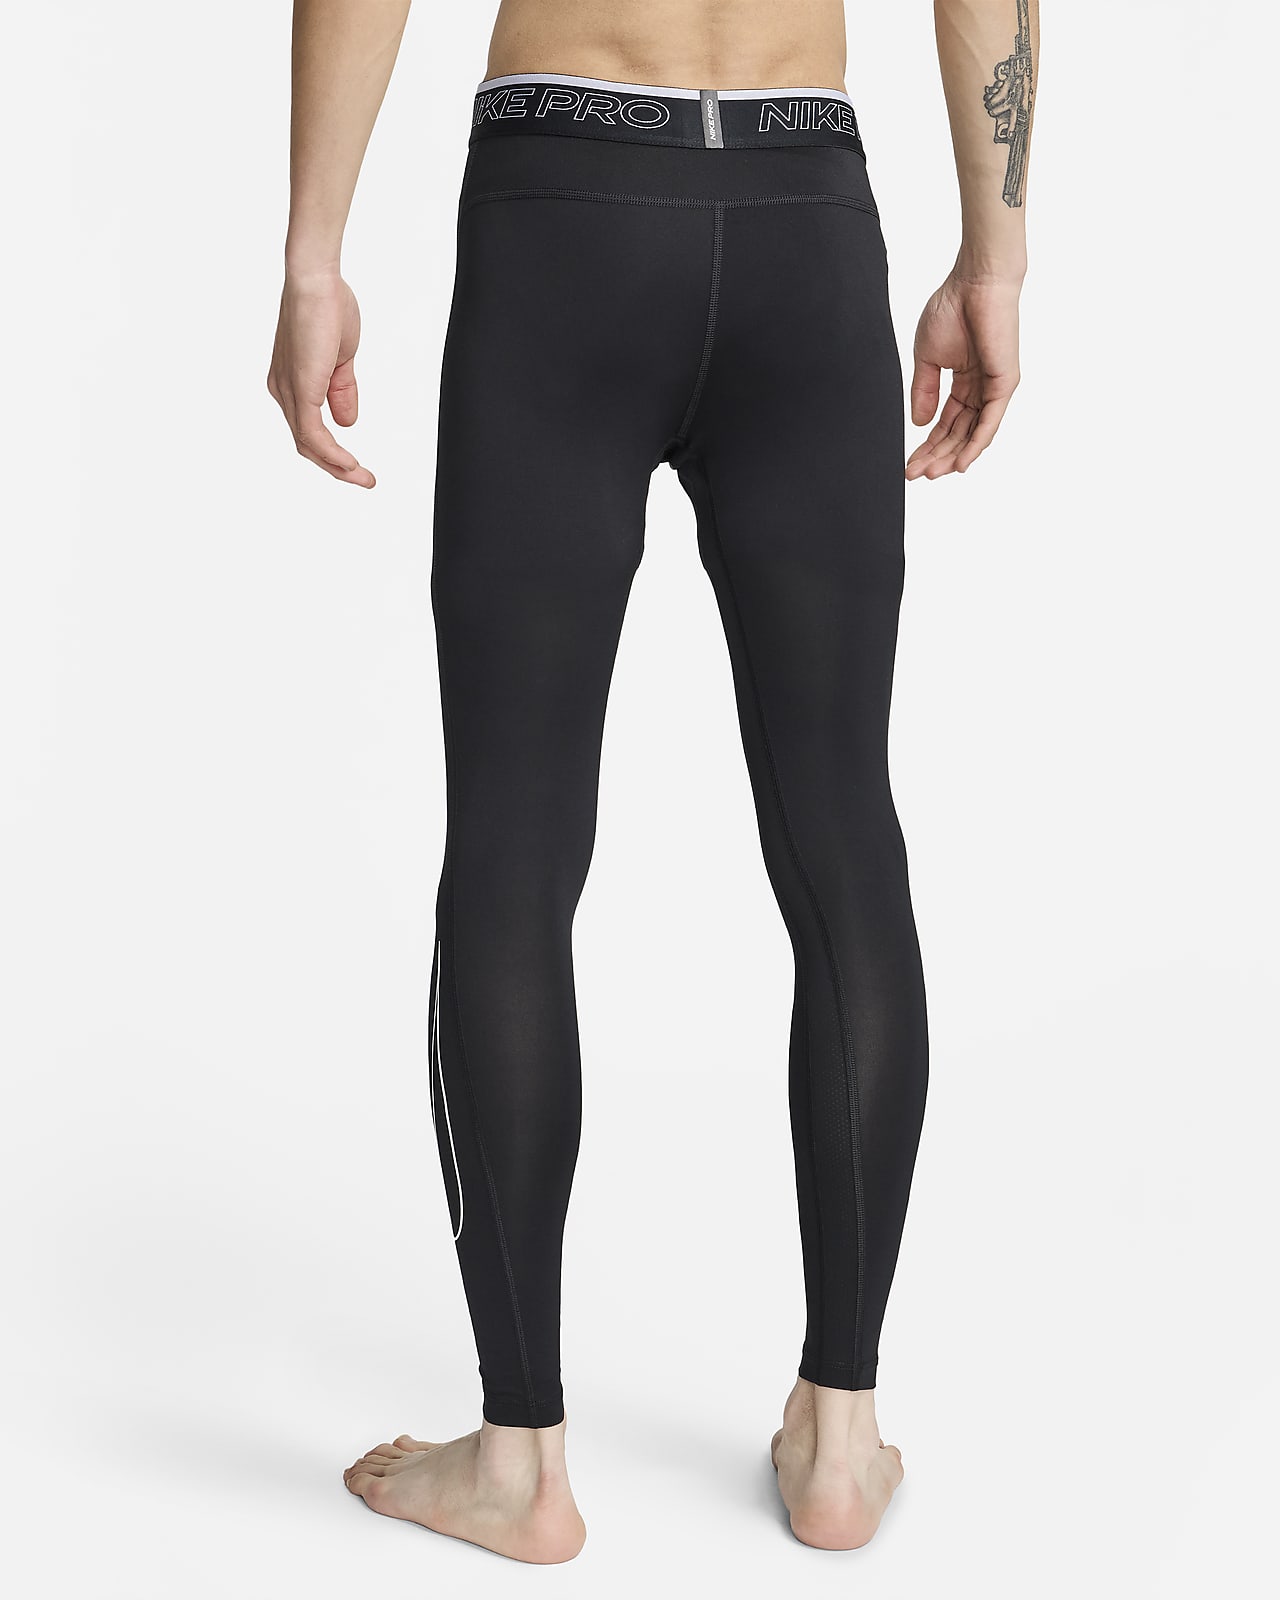 https://static.nike.com/a/images/t_PDP_1280_v1/f_auto,q_auto:eco/b55cbed5-e5aa-4641-8b92-7fed505d43f9/pro-dri-fit-tights-ntdHDx.png